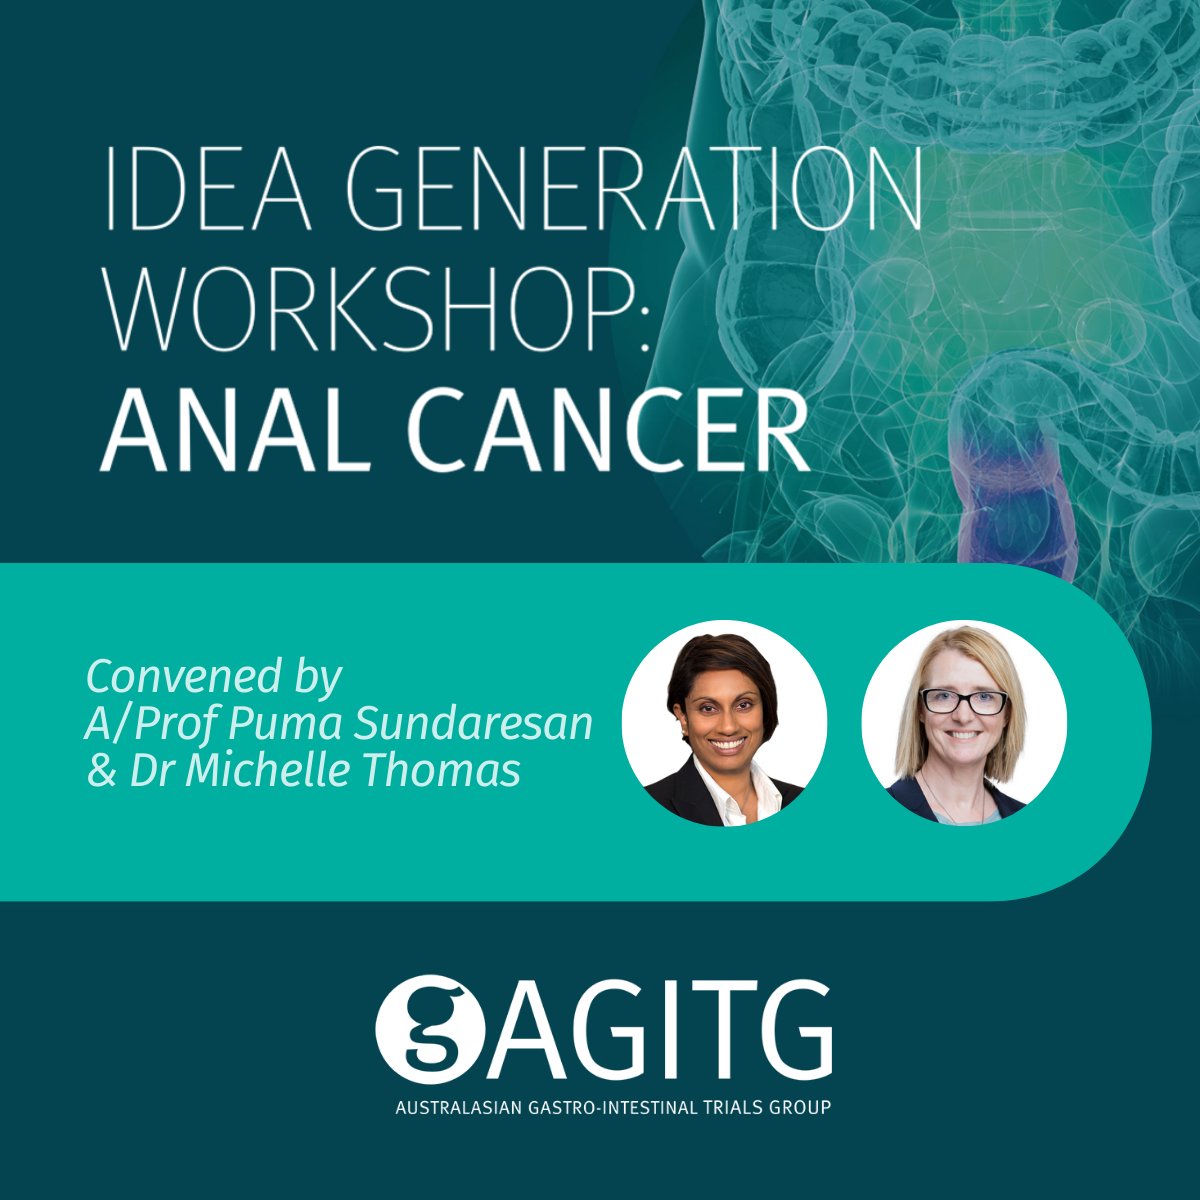 📢 The Idea Generation Workshop on anal cancer is on now!

Nine exciting ideas will be discussed today, convened by A/Prof Puma Sundaresan & 
Dr Michelle Thomas. Stay tuned as we highlight each presentation.

#IGW #GICancer @sundap15